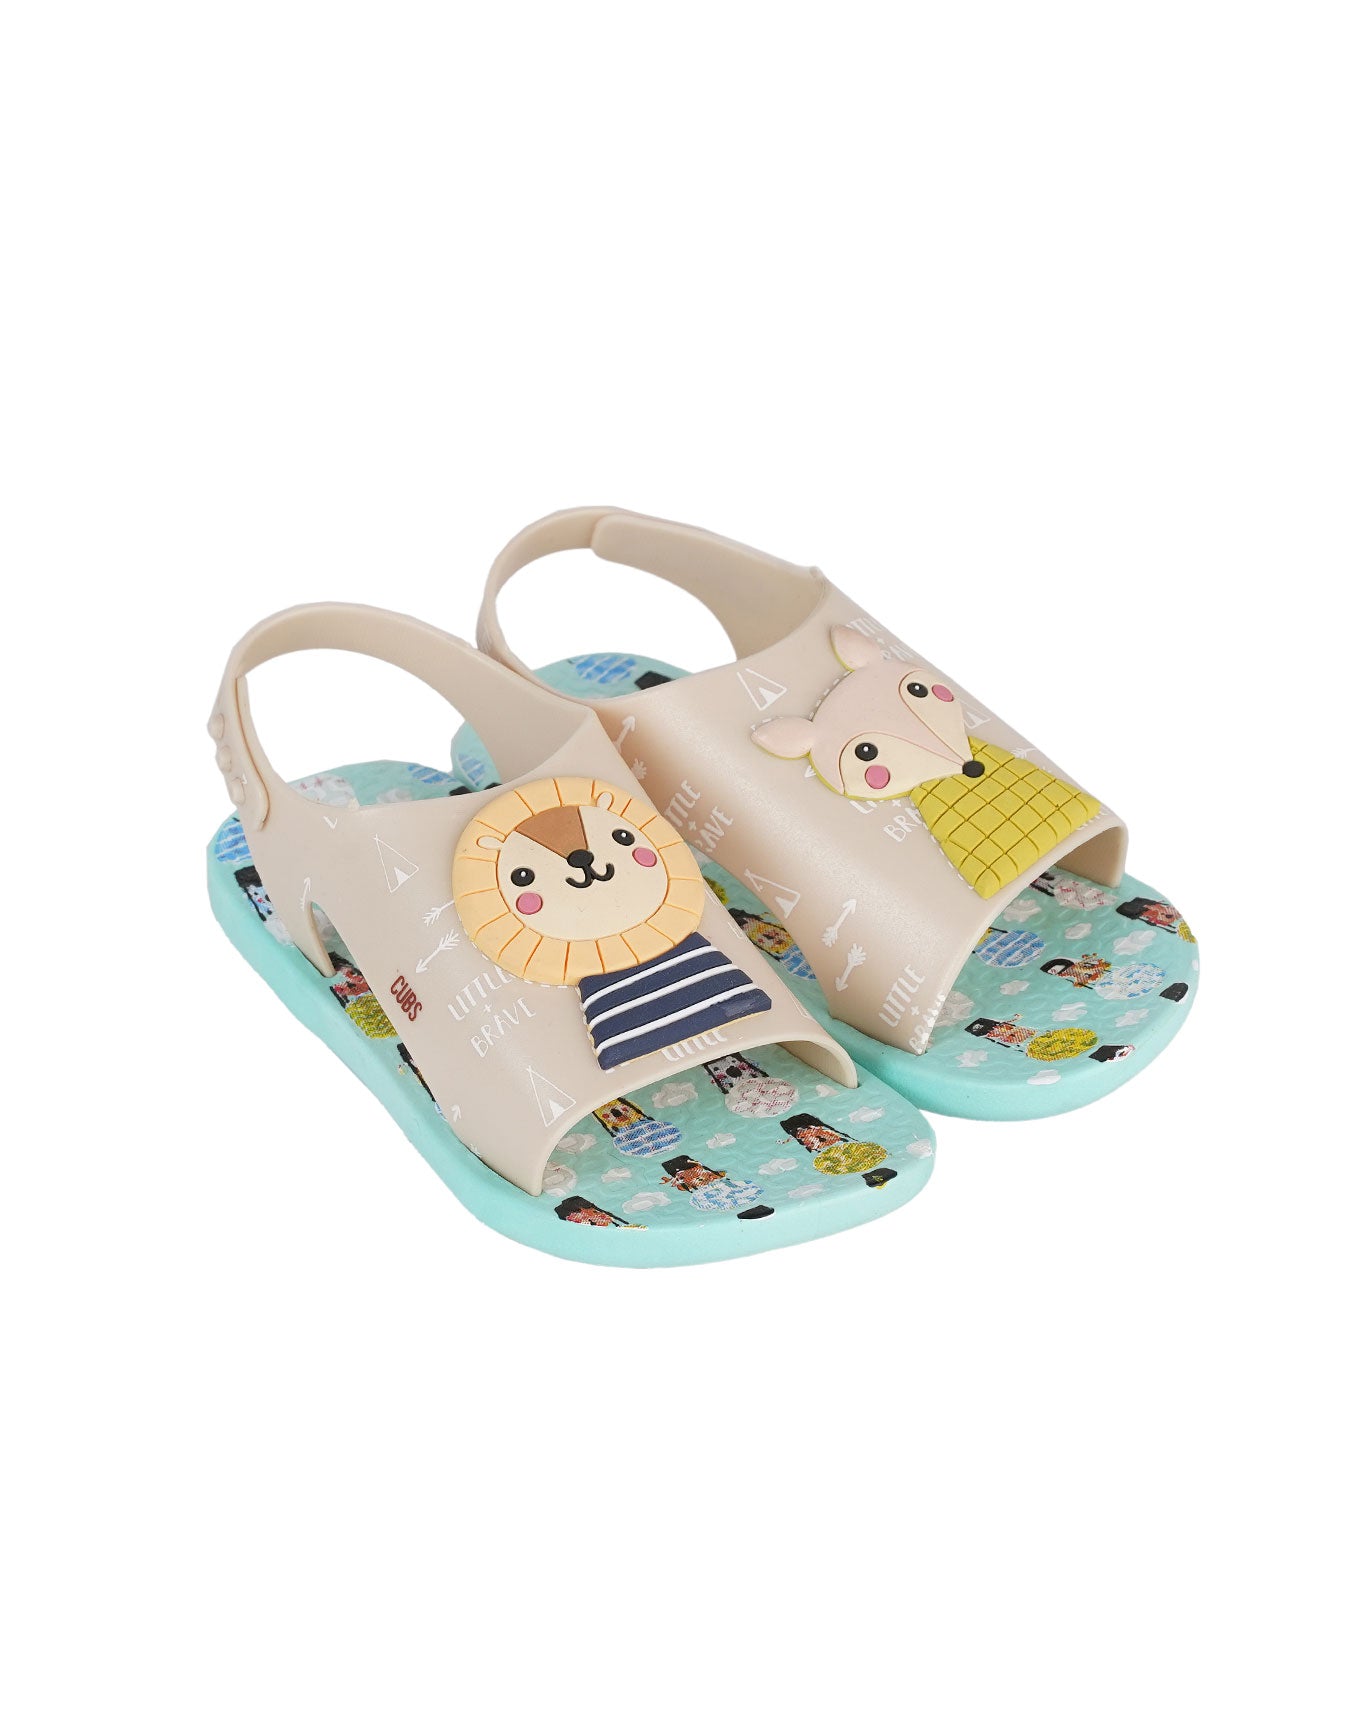 The Lion & The Fox Baby Sandals